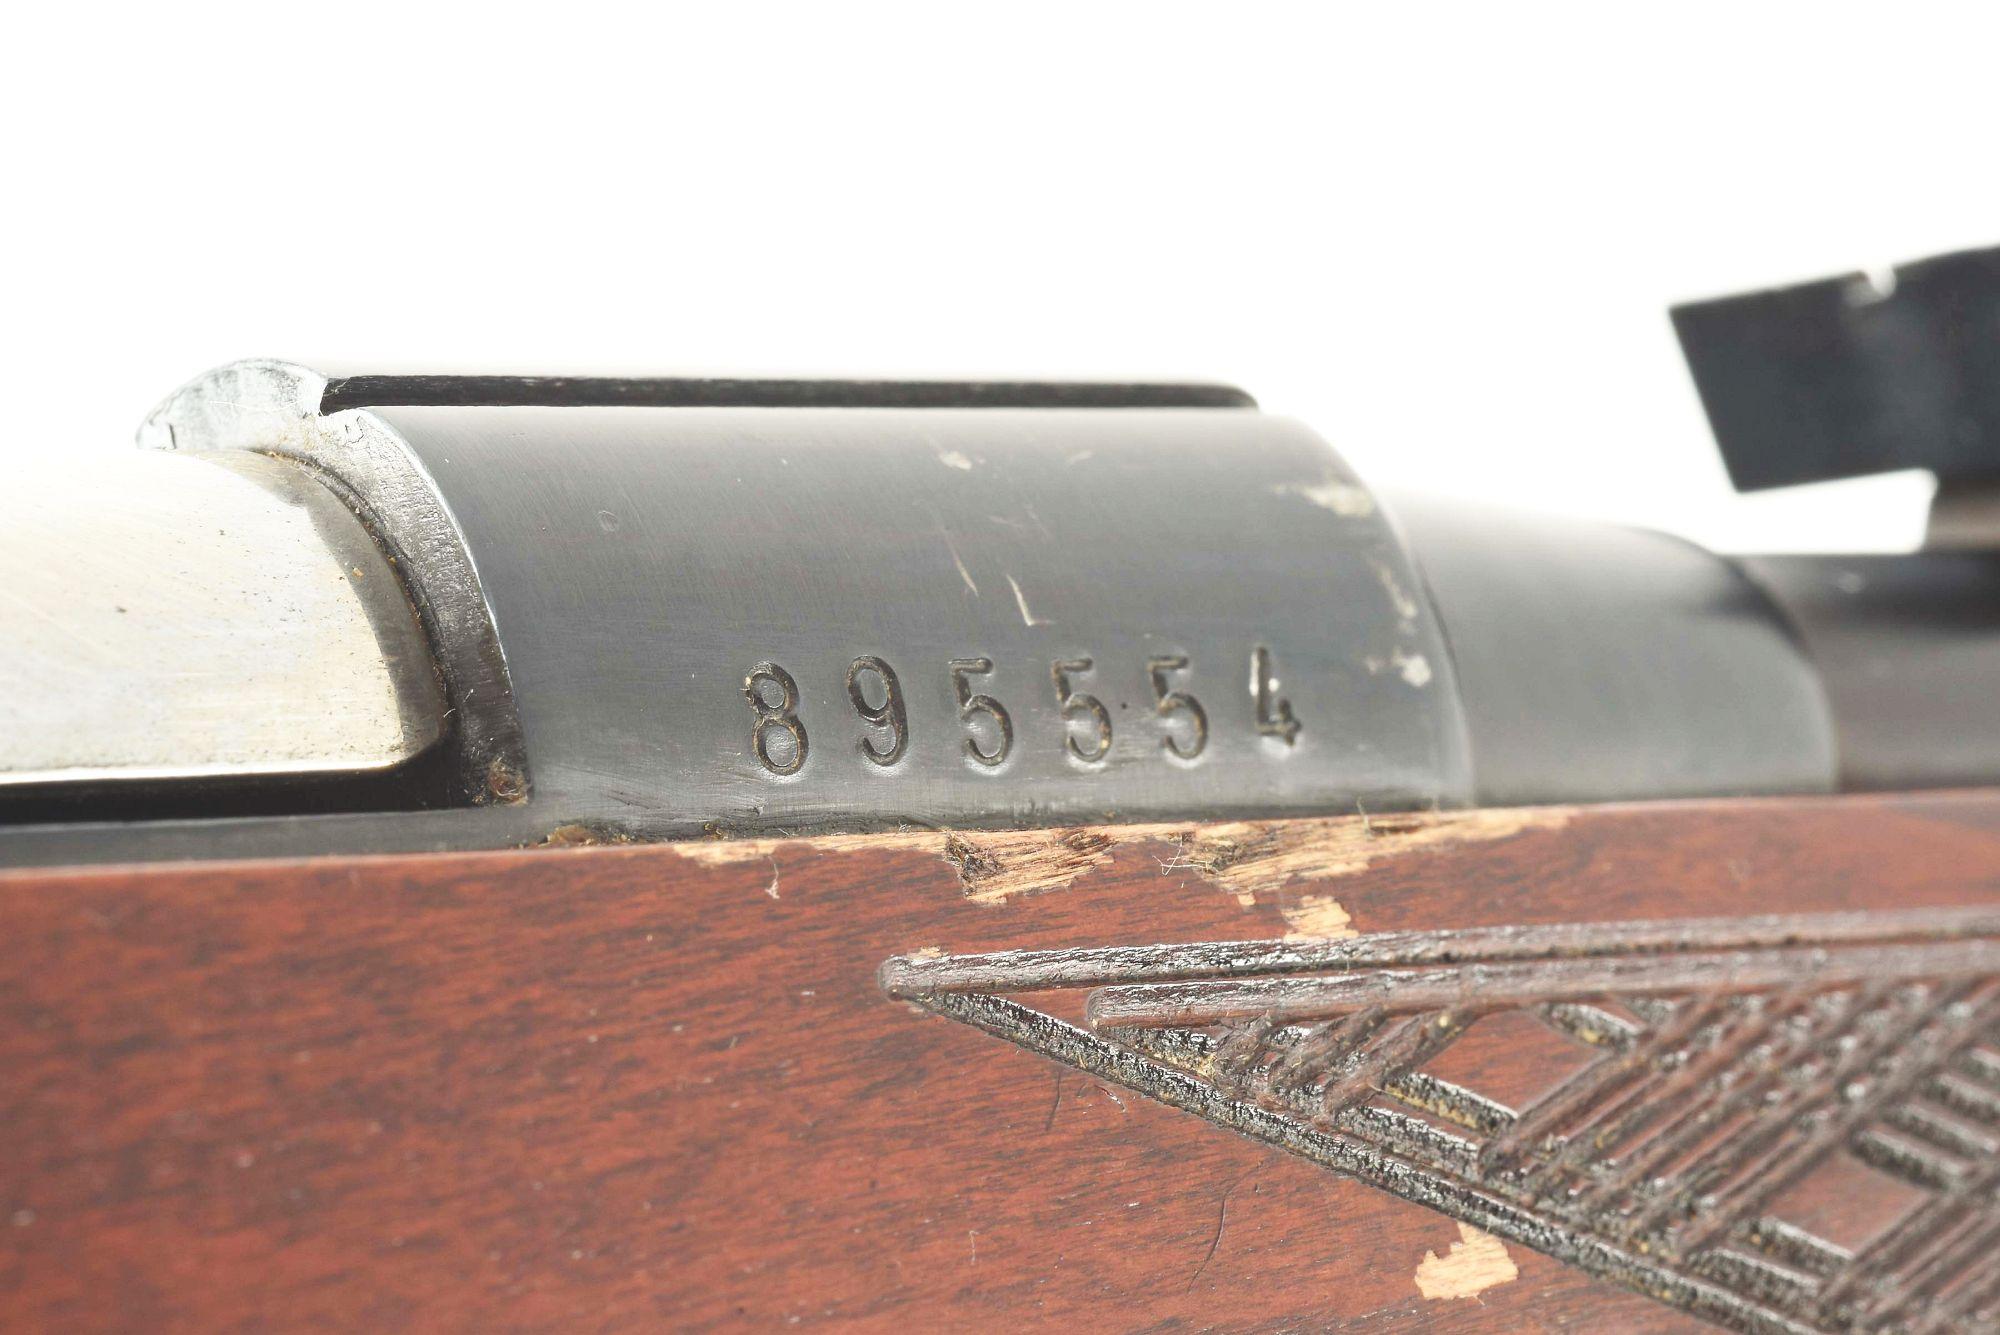 (N) SWD REGISTERED VOERE 2005/1 MACHINE GUN RIFLE IN .22 LR FULL AUTO (FULLY TRANSFERABLE).